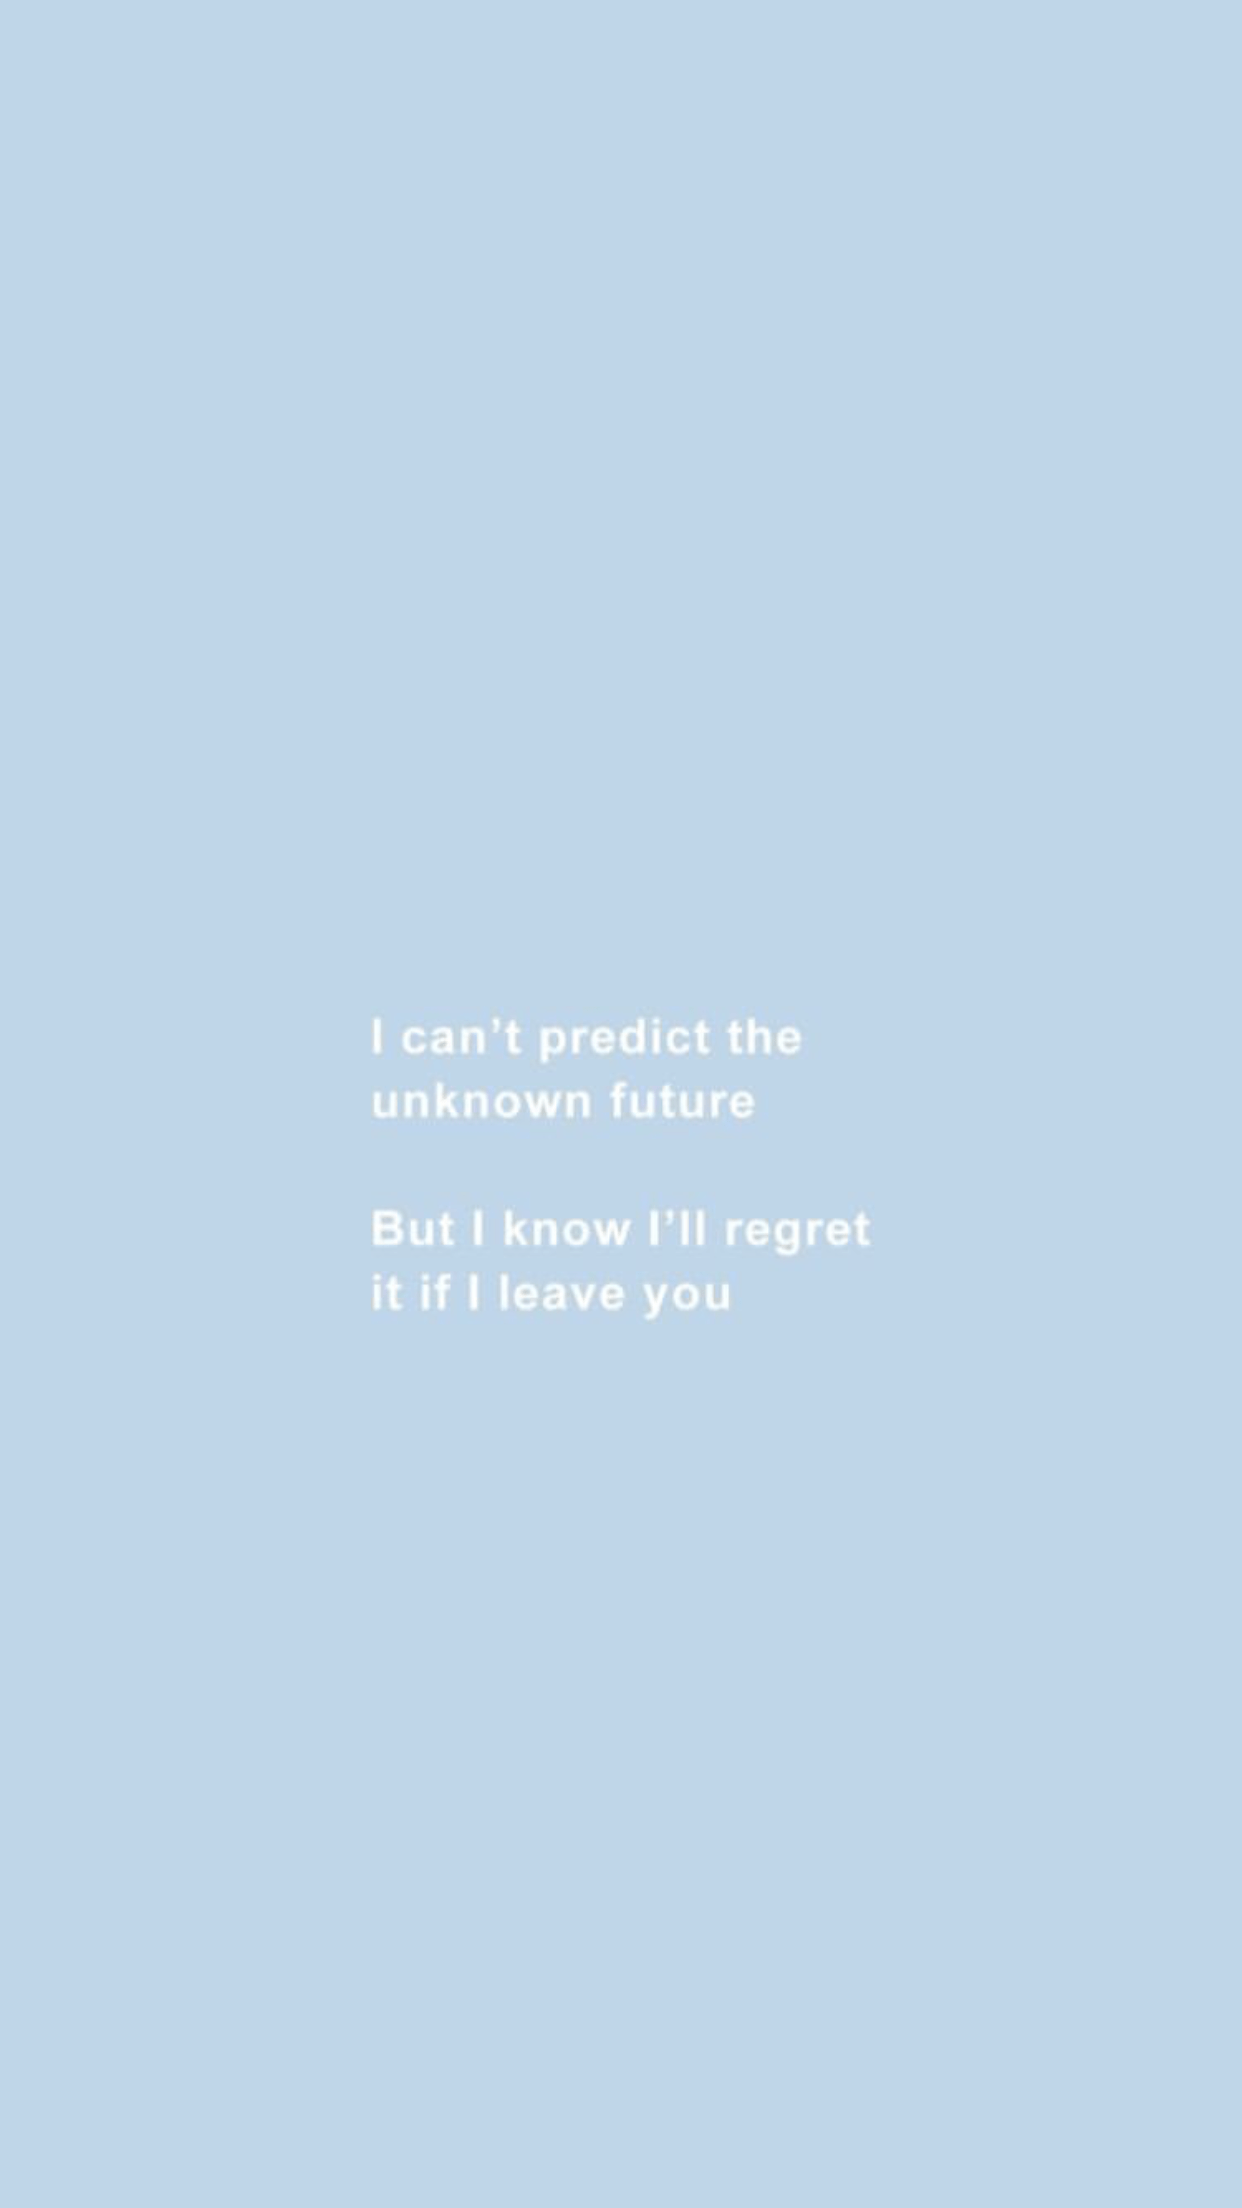 Aesthetic background with a quote about leaving someone - Pastel blue